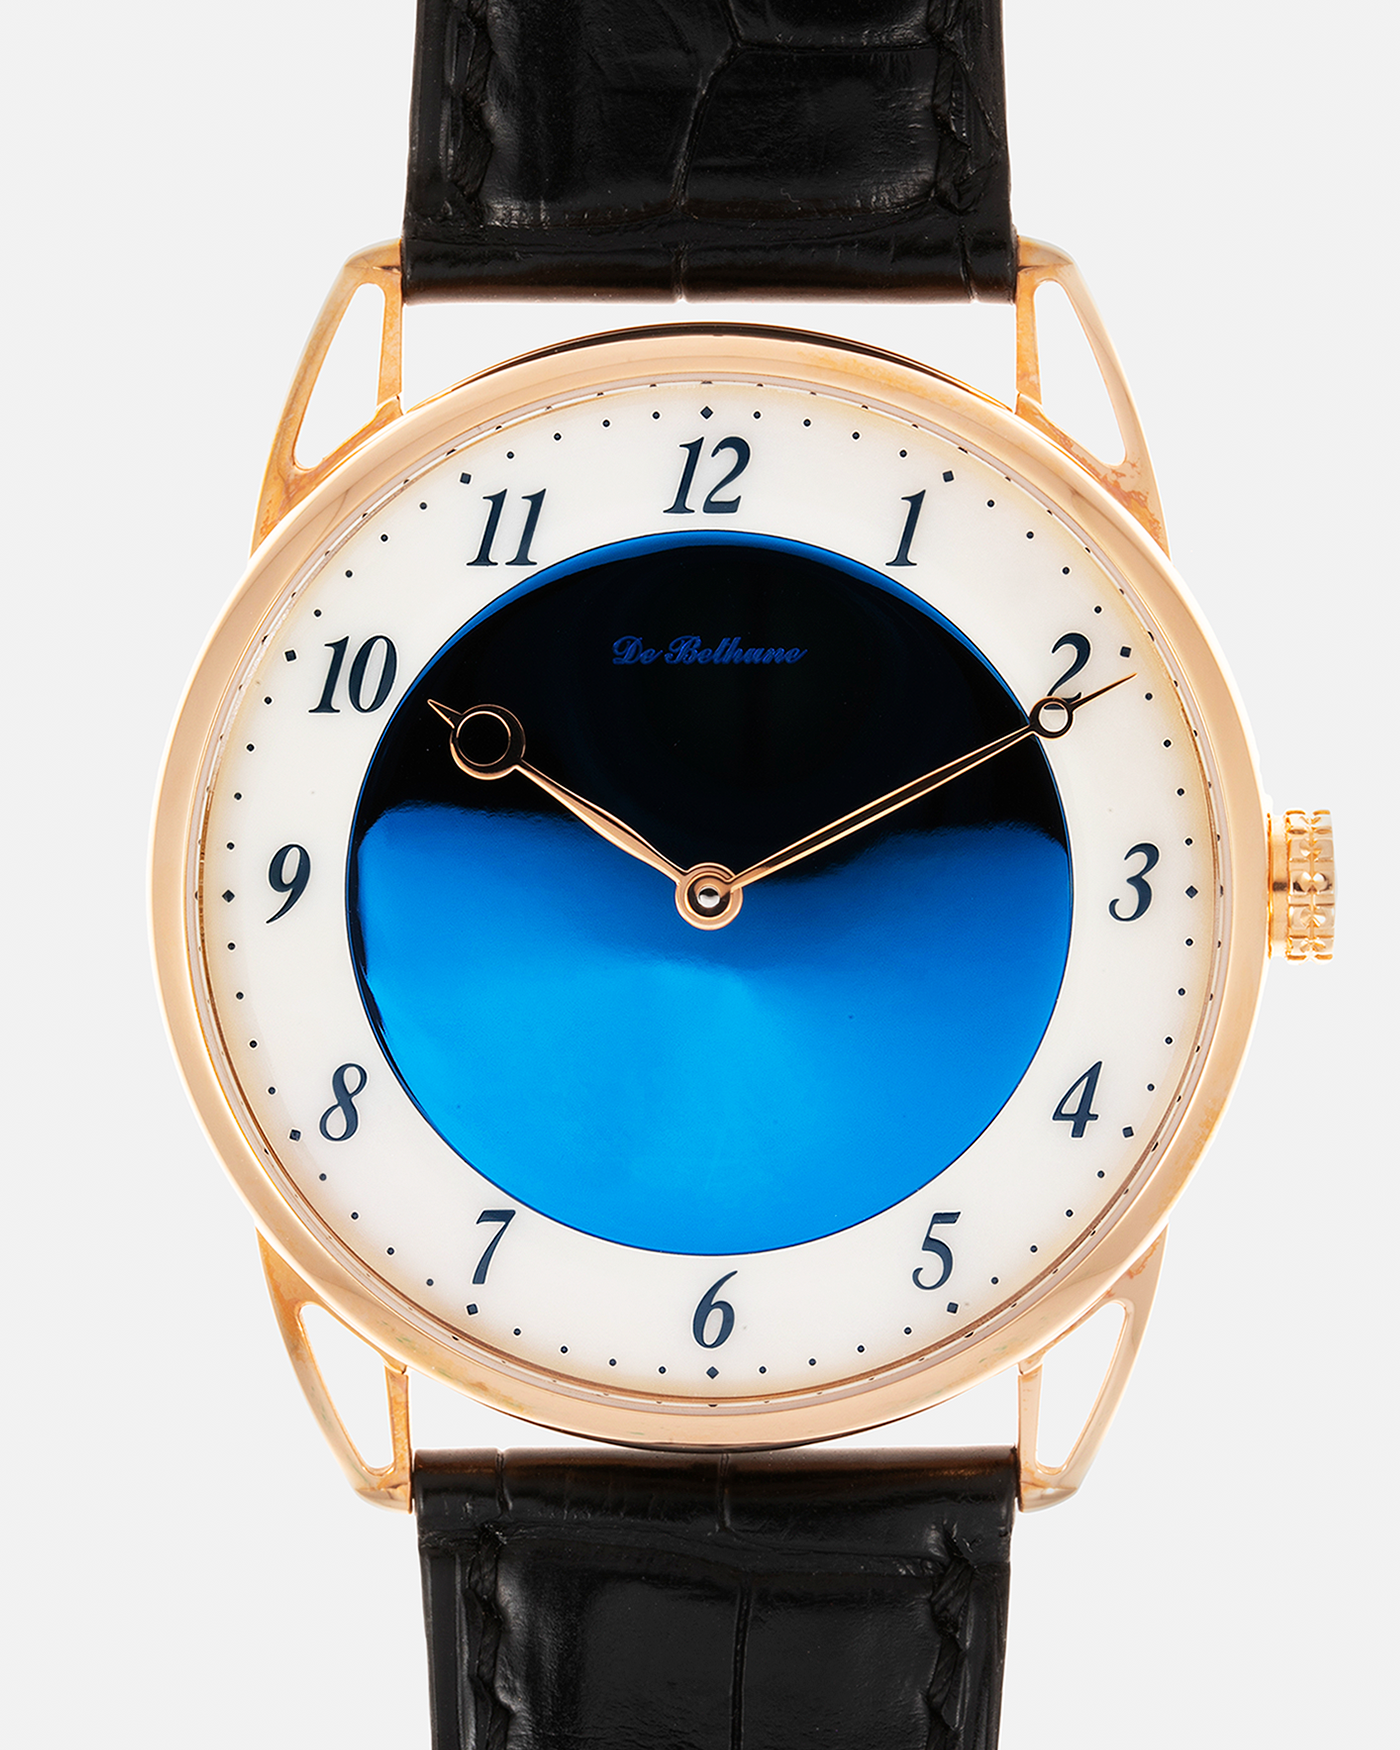 Brand: De Bethune Year: Circa 2020 Model: Midnight Blue Reference: DB25XPARV2 Material: 18-carat Rose Gold Movement: De Bethune Cal. DB2024, Self-Winding Case Diameter: 42mm Strap: De Bethune Black Alligator with Signed 18-carat Rose Gold Tang Buckle